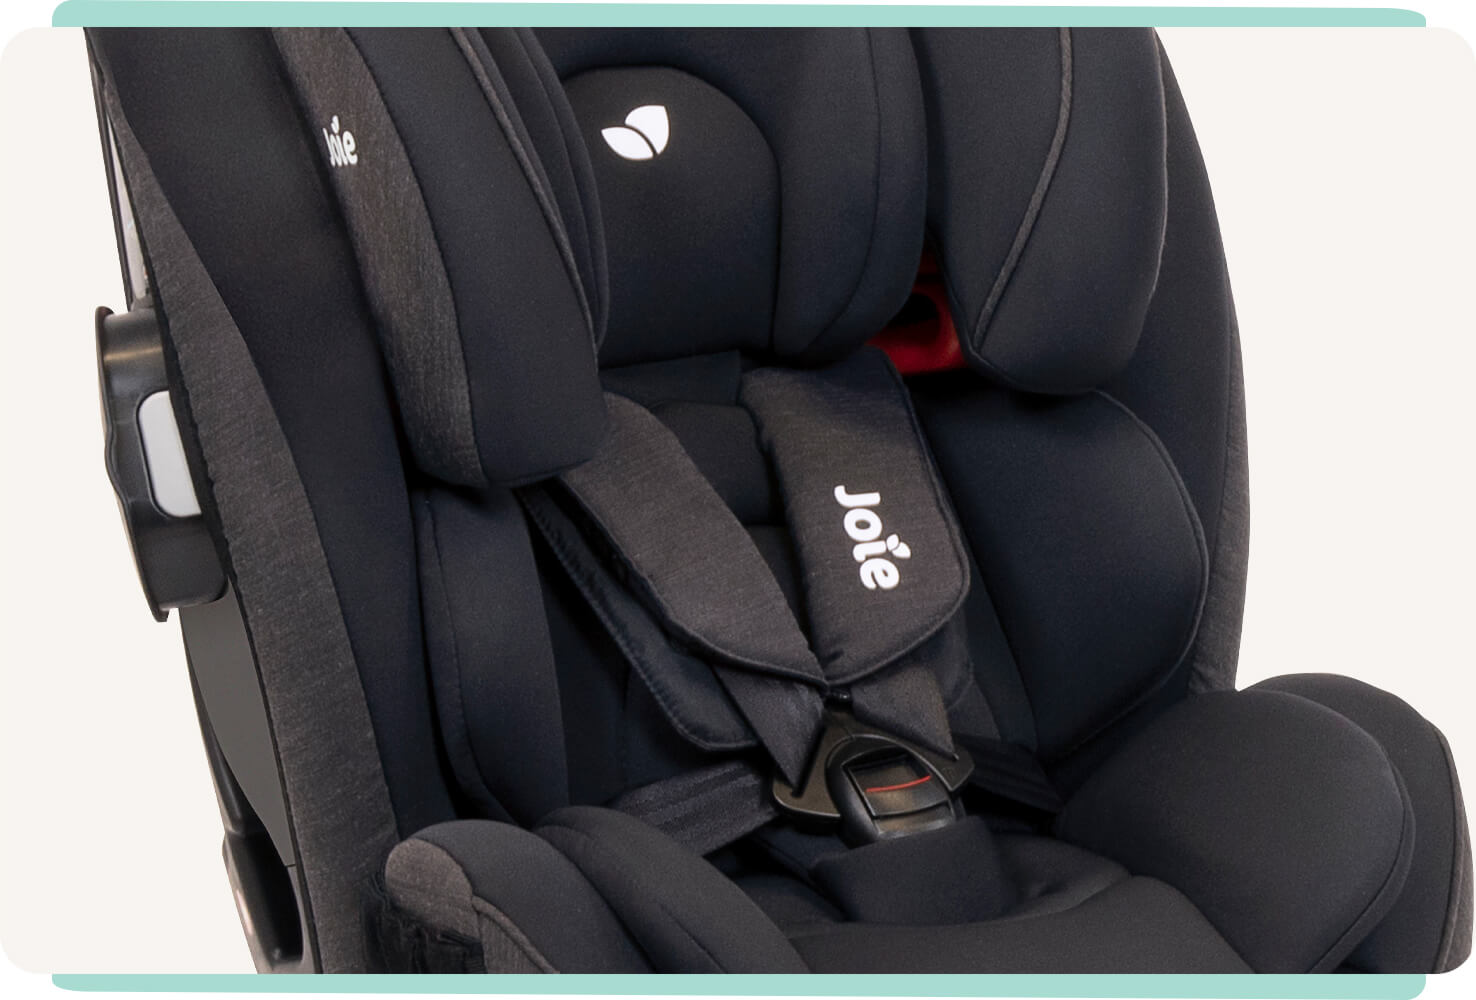 Closeup of a light black Joie Every Stage FX car seat showing the 5-point harness and infant insert.